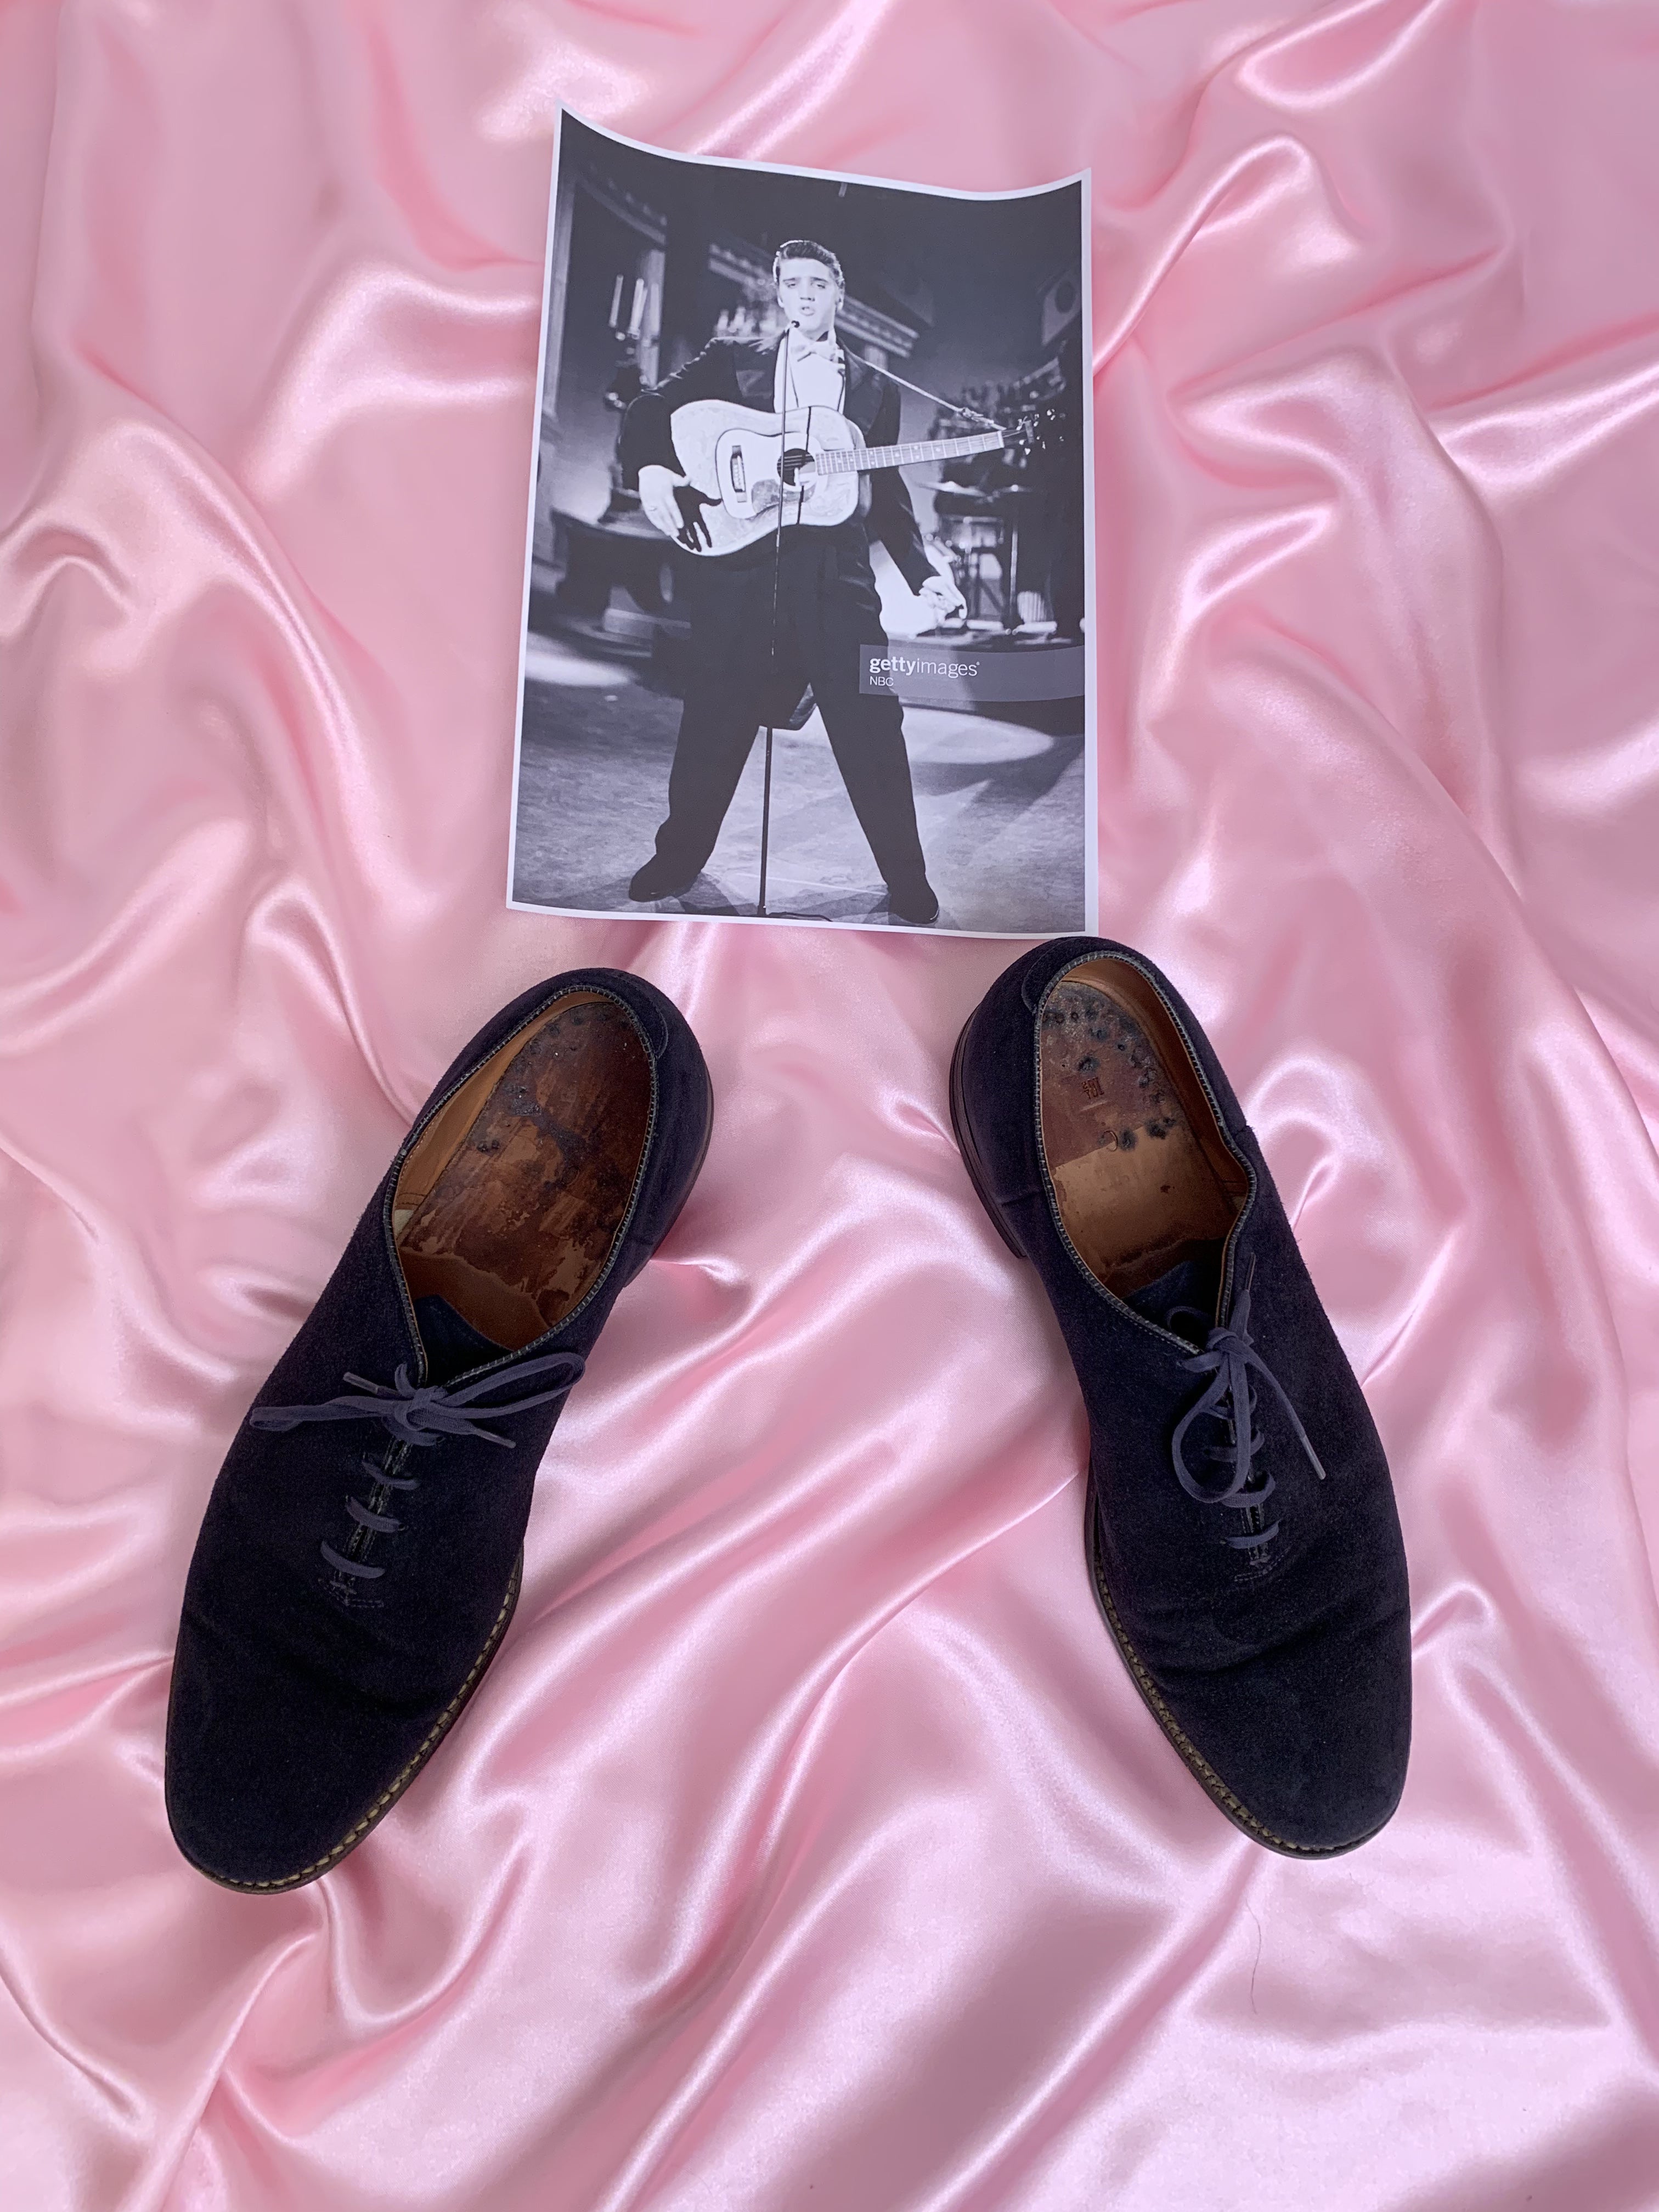 One for the money: Elvis Presley's blue suede shoes go for six figures at  auction | The Independent